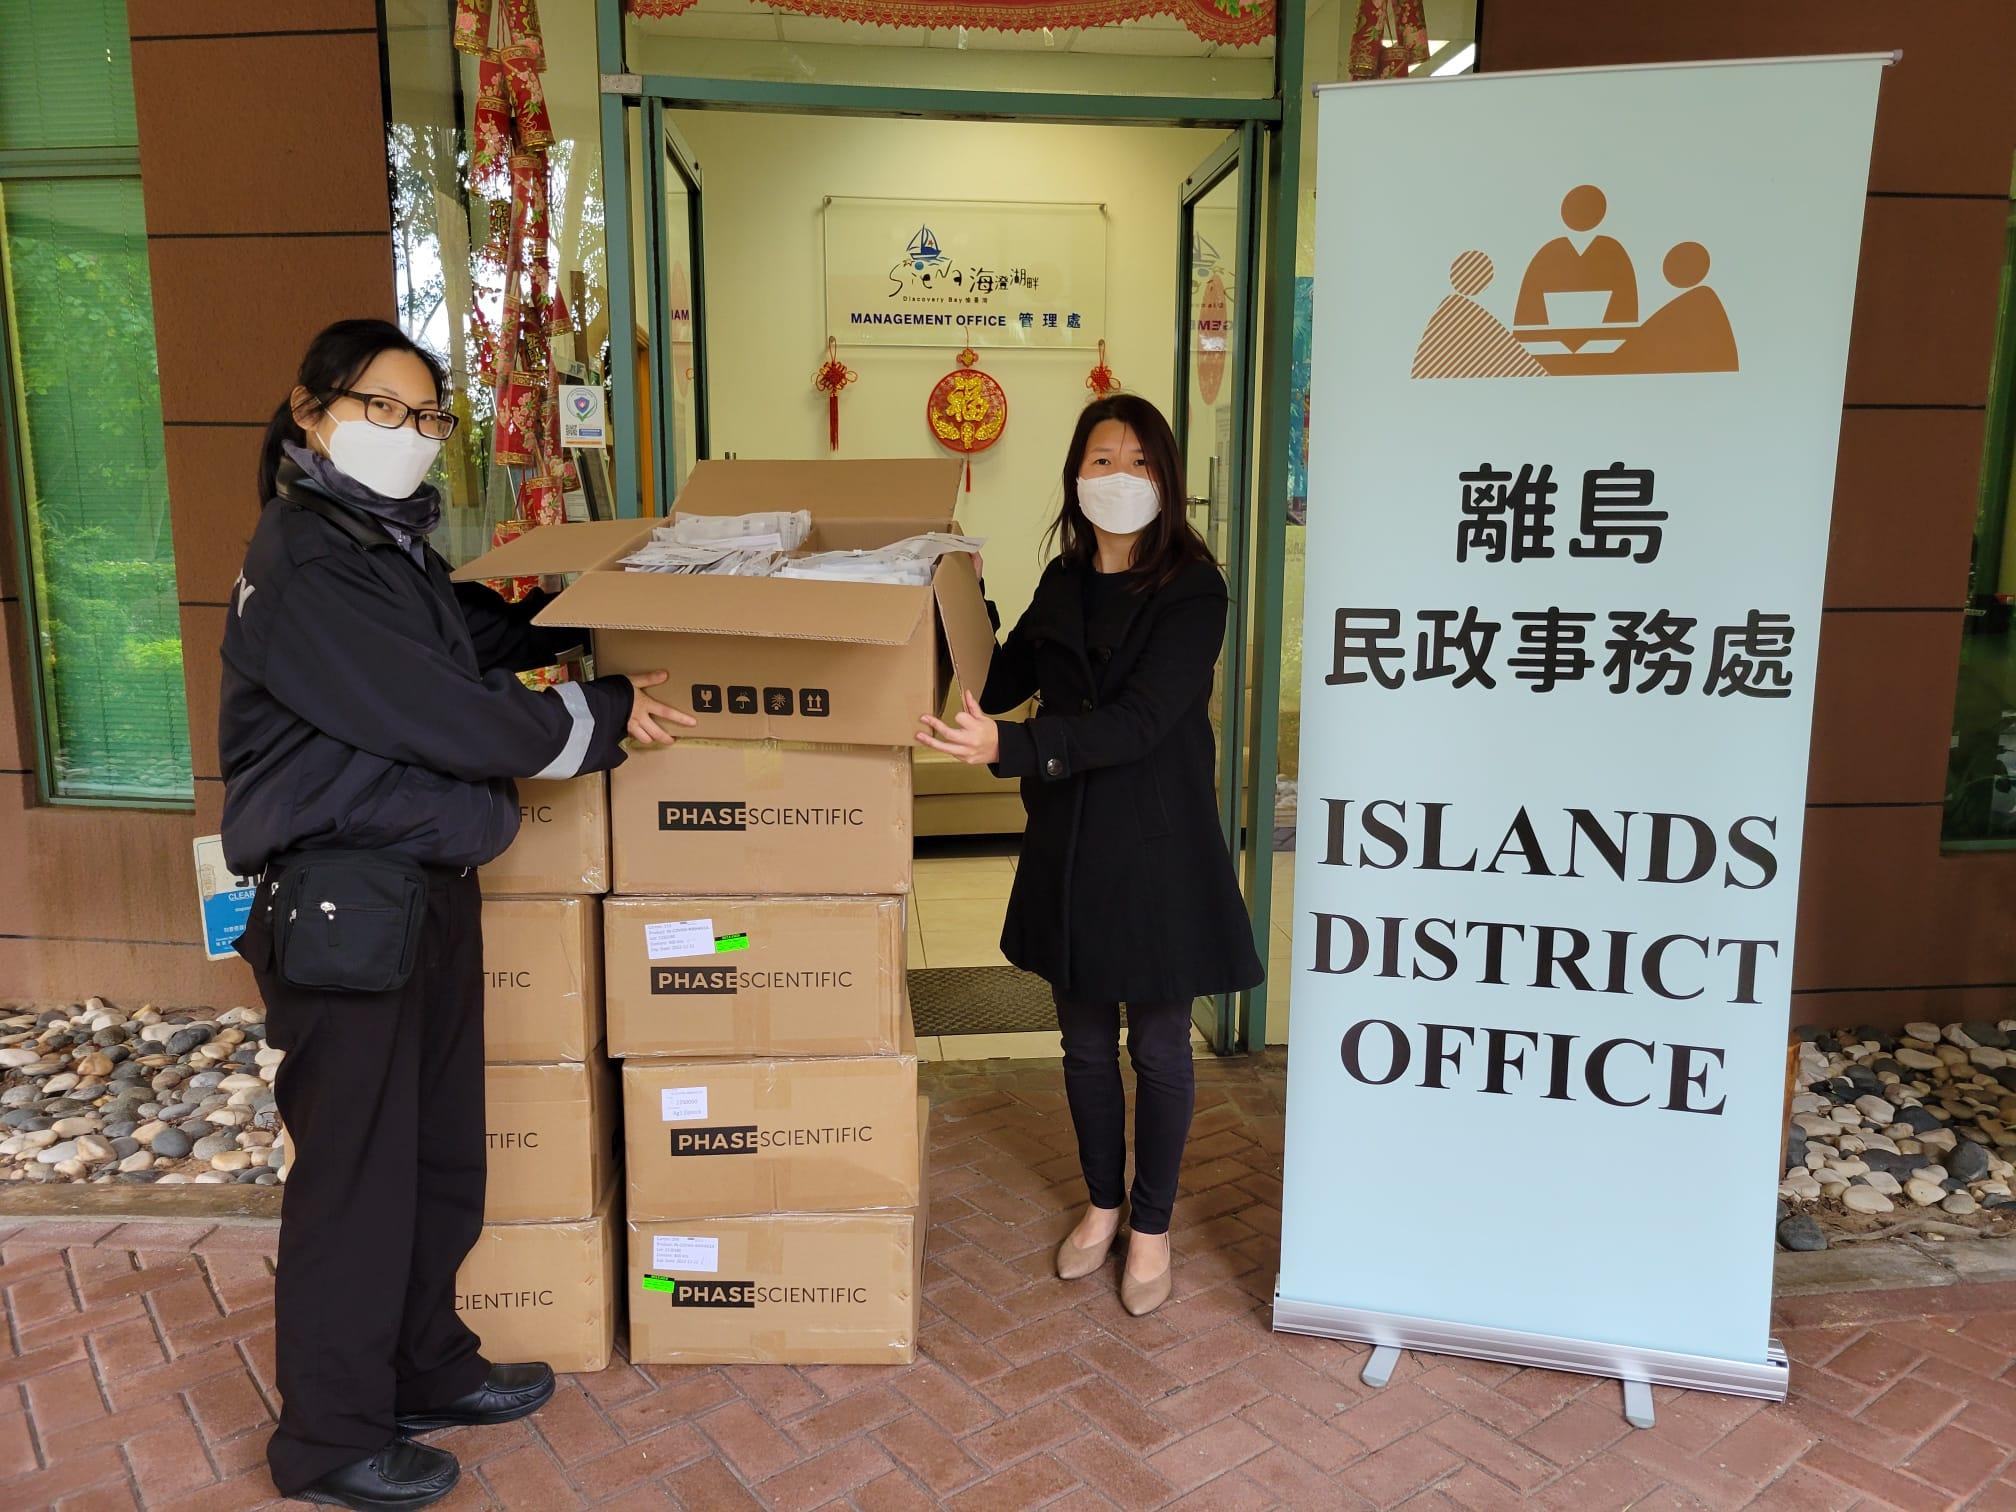 The Islands District Office today (February 4) distributed COVID-19 rapid test kits through a property management company in Discovery Bay to households, cleansing workers and property management staff within the area for voluntary testing.